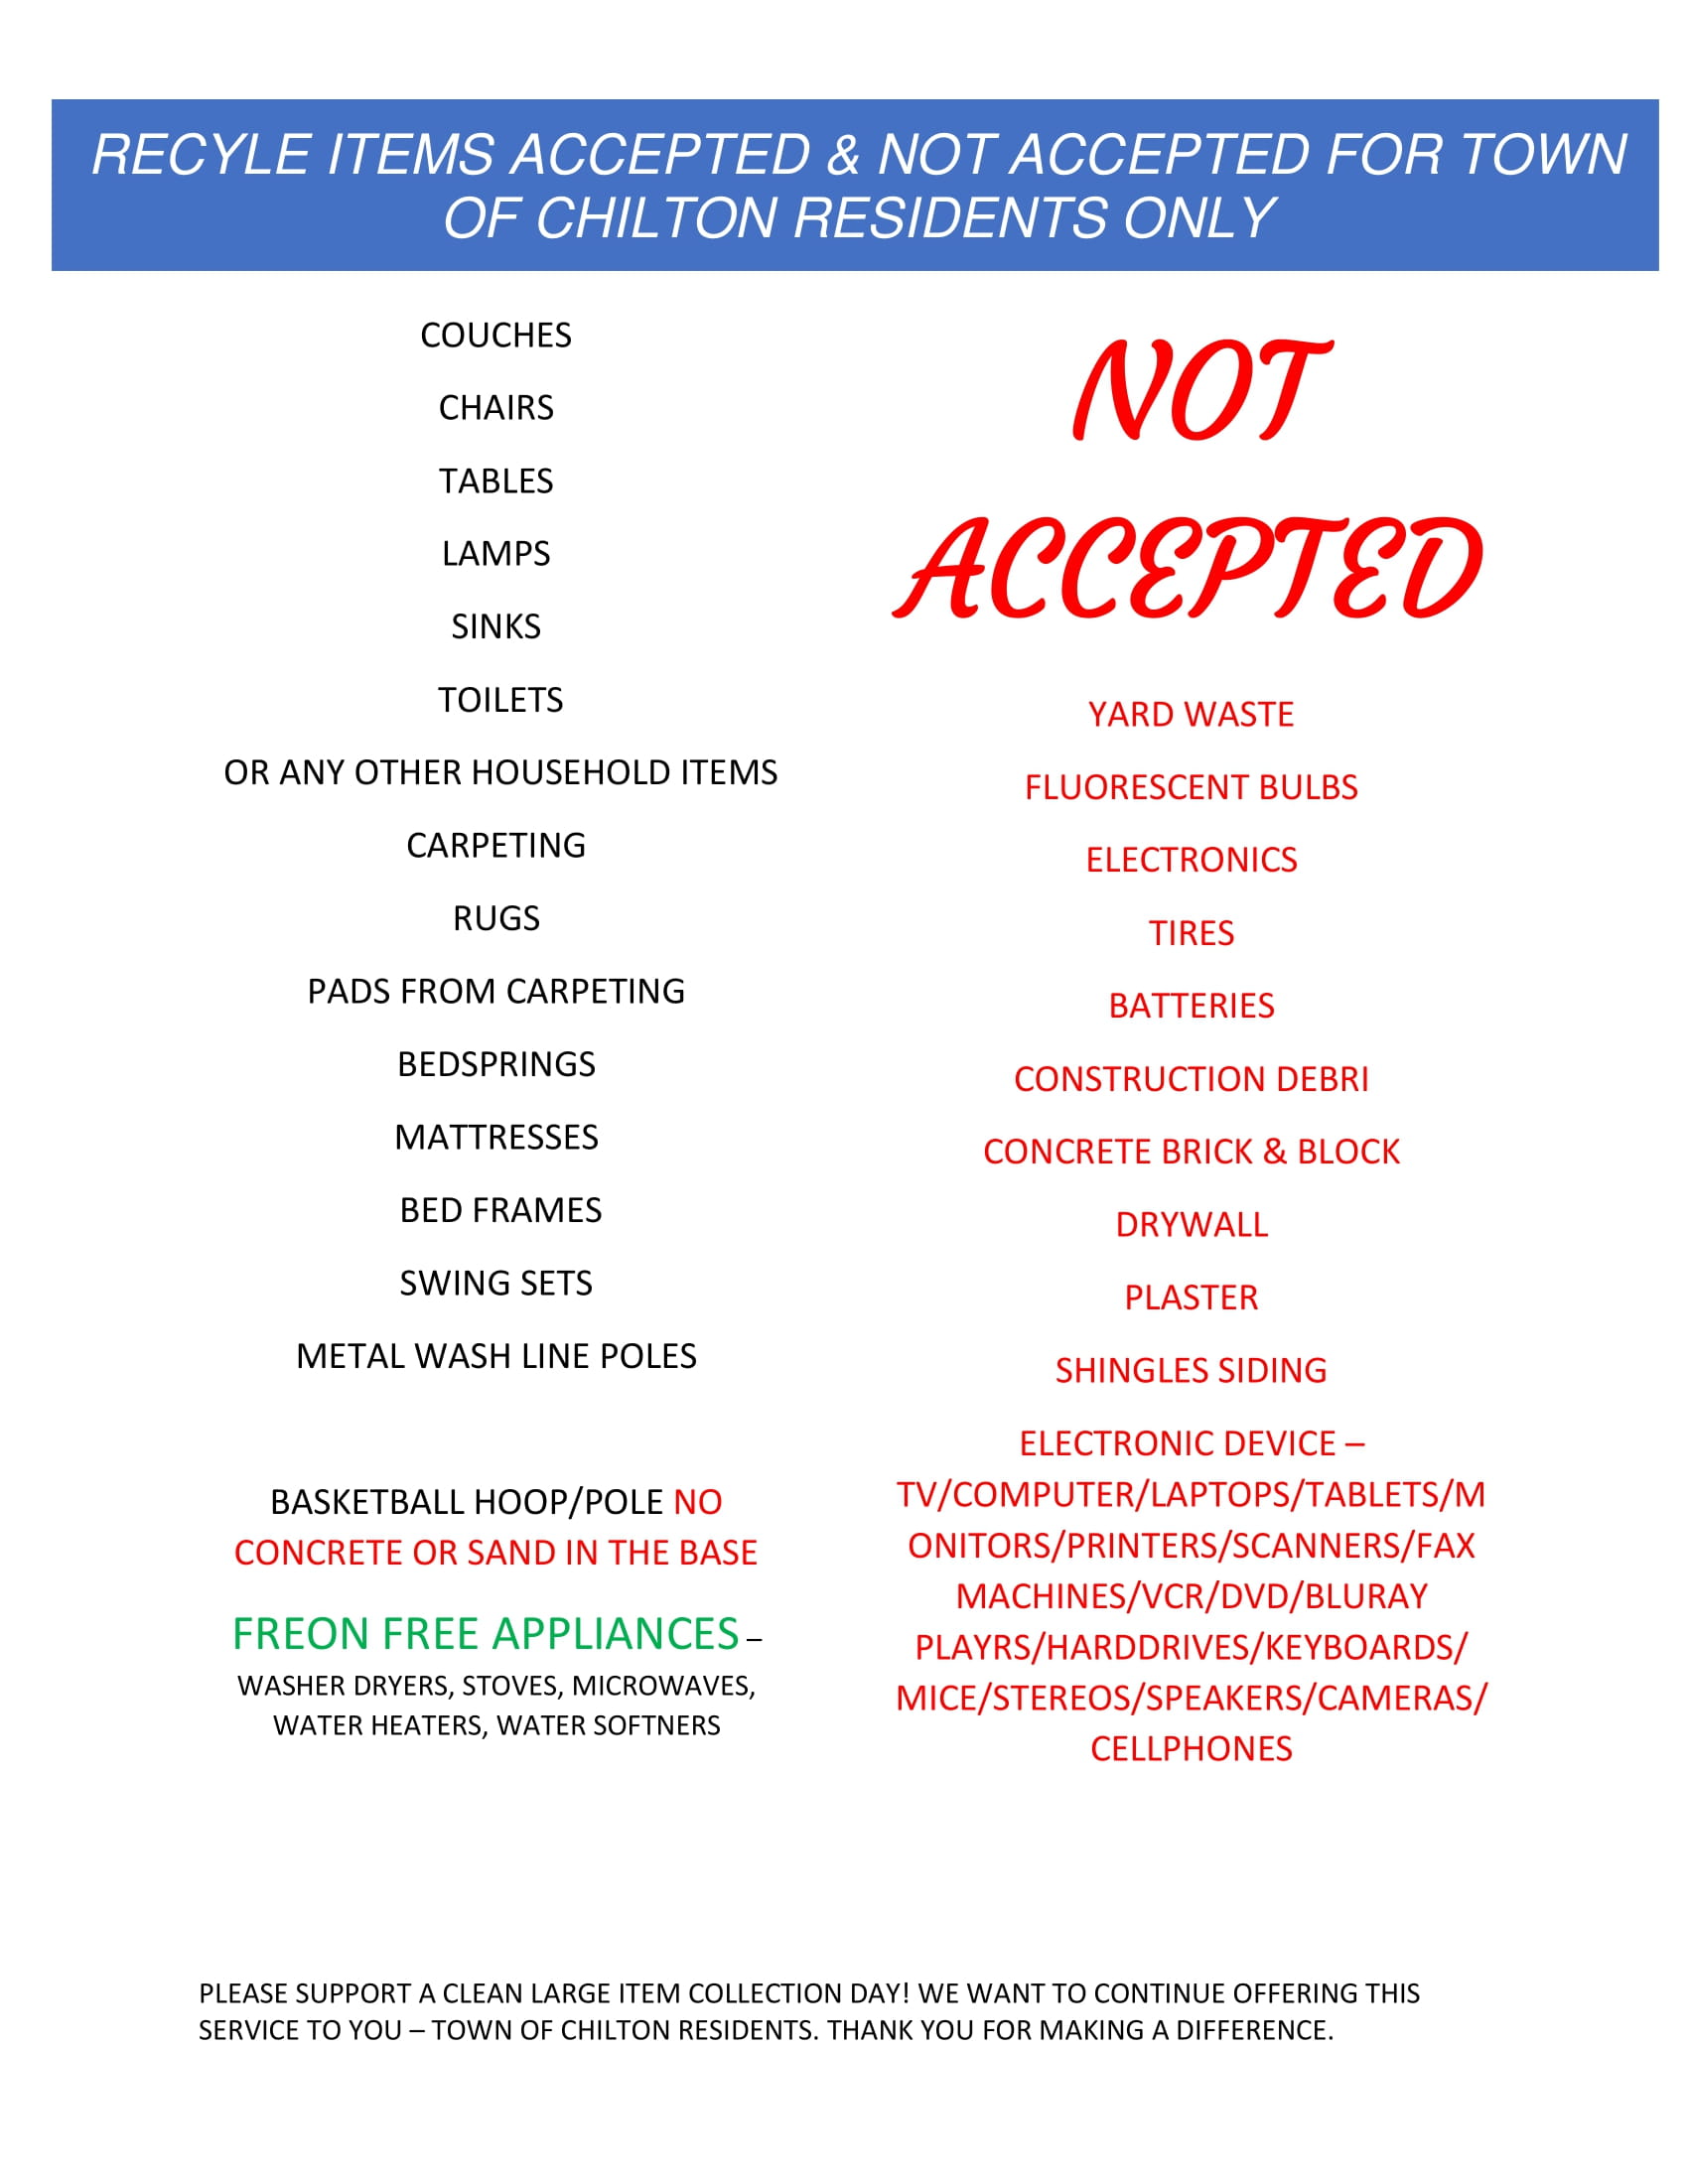 Recycle items accepted & not accepted for town of Chilton residents only